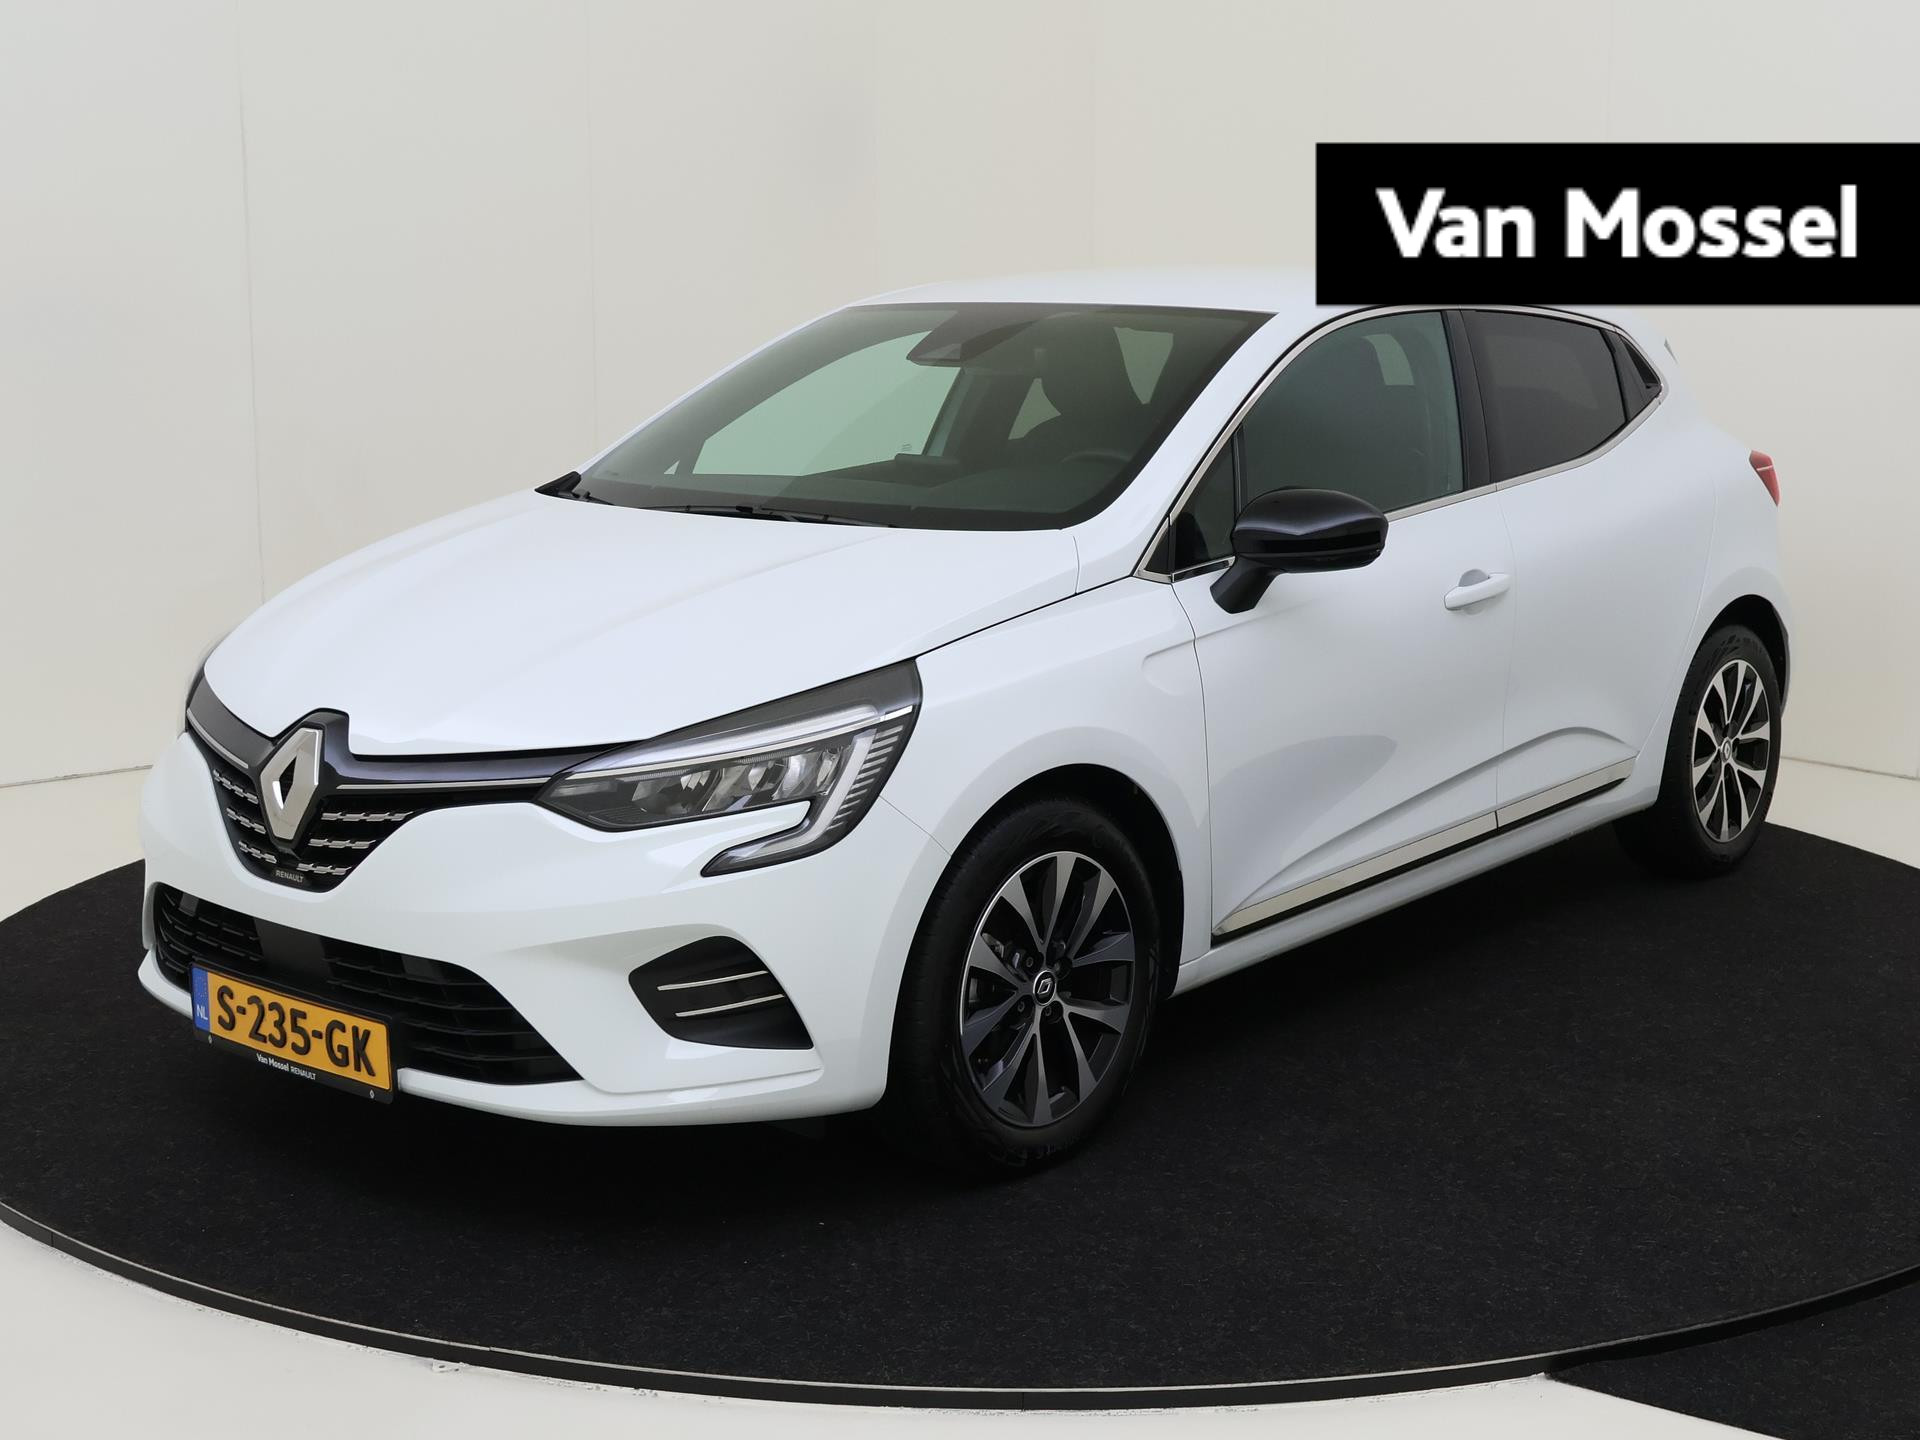 Renault Clio 1.0 TCe 90 Techno | 9,3" Full Map Navigatie | Virtual Cockpit | Camera | PDC Voor+Achter | 16" LMV | Climate Control | Apple Carplay & Android Auto